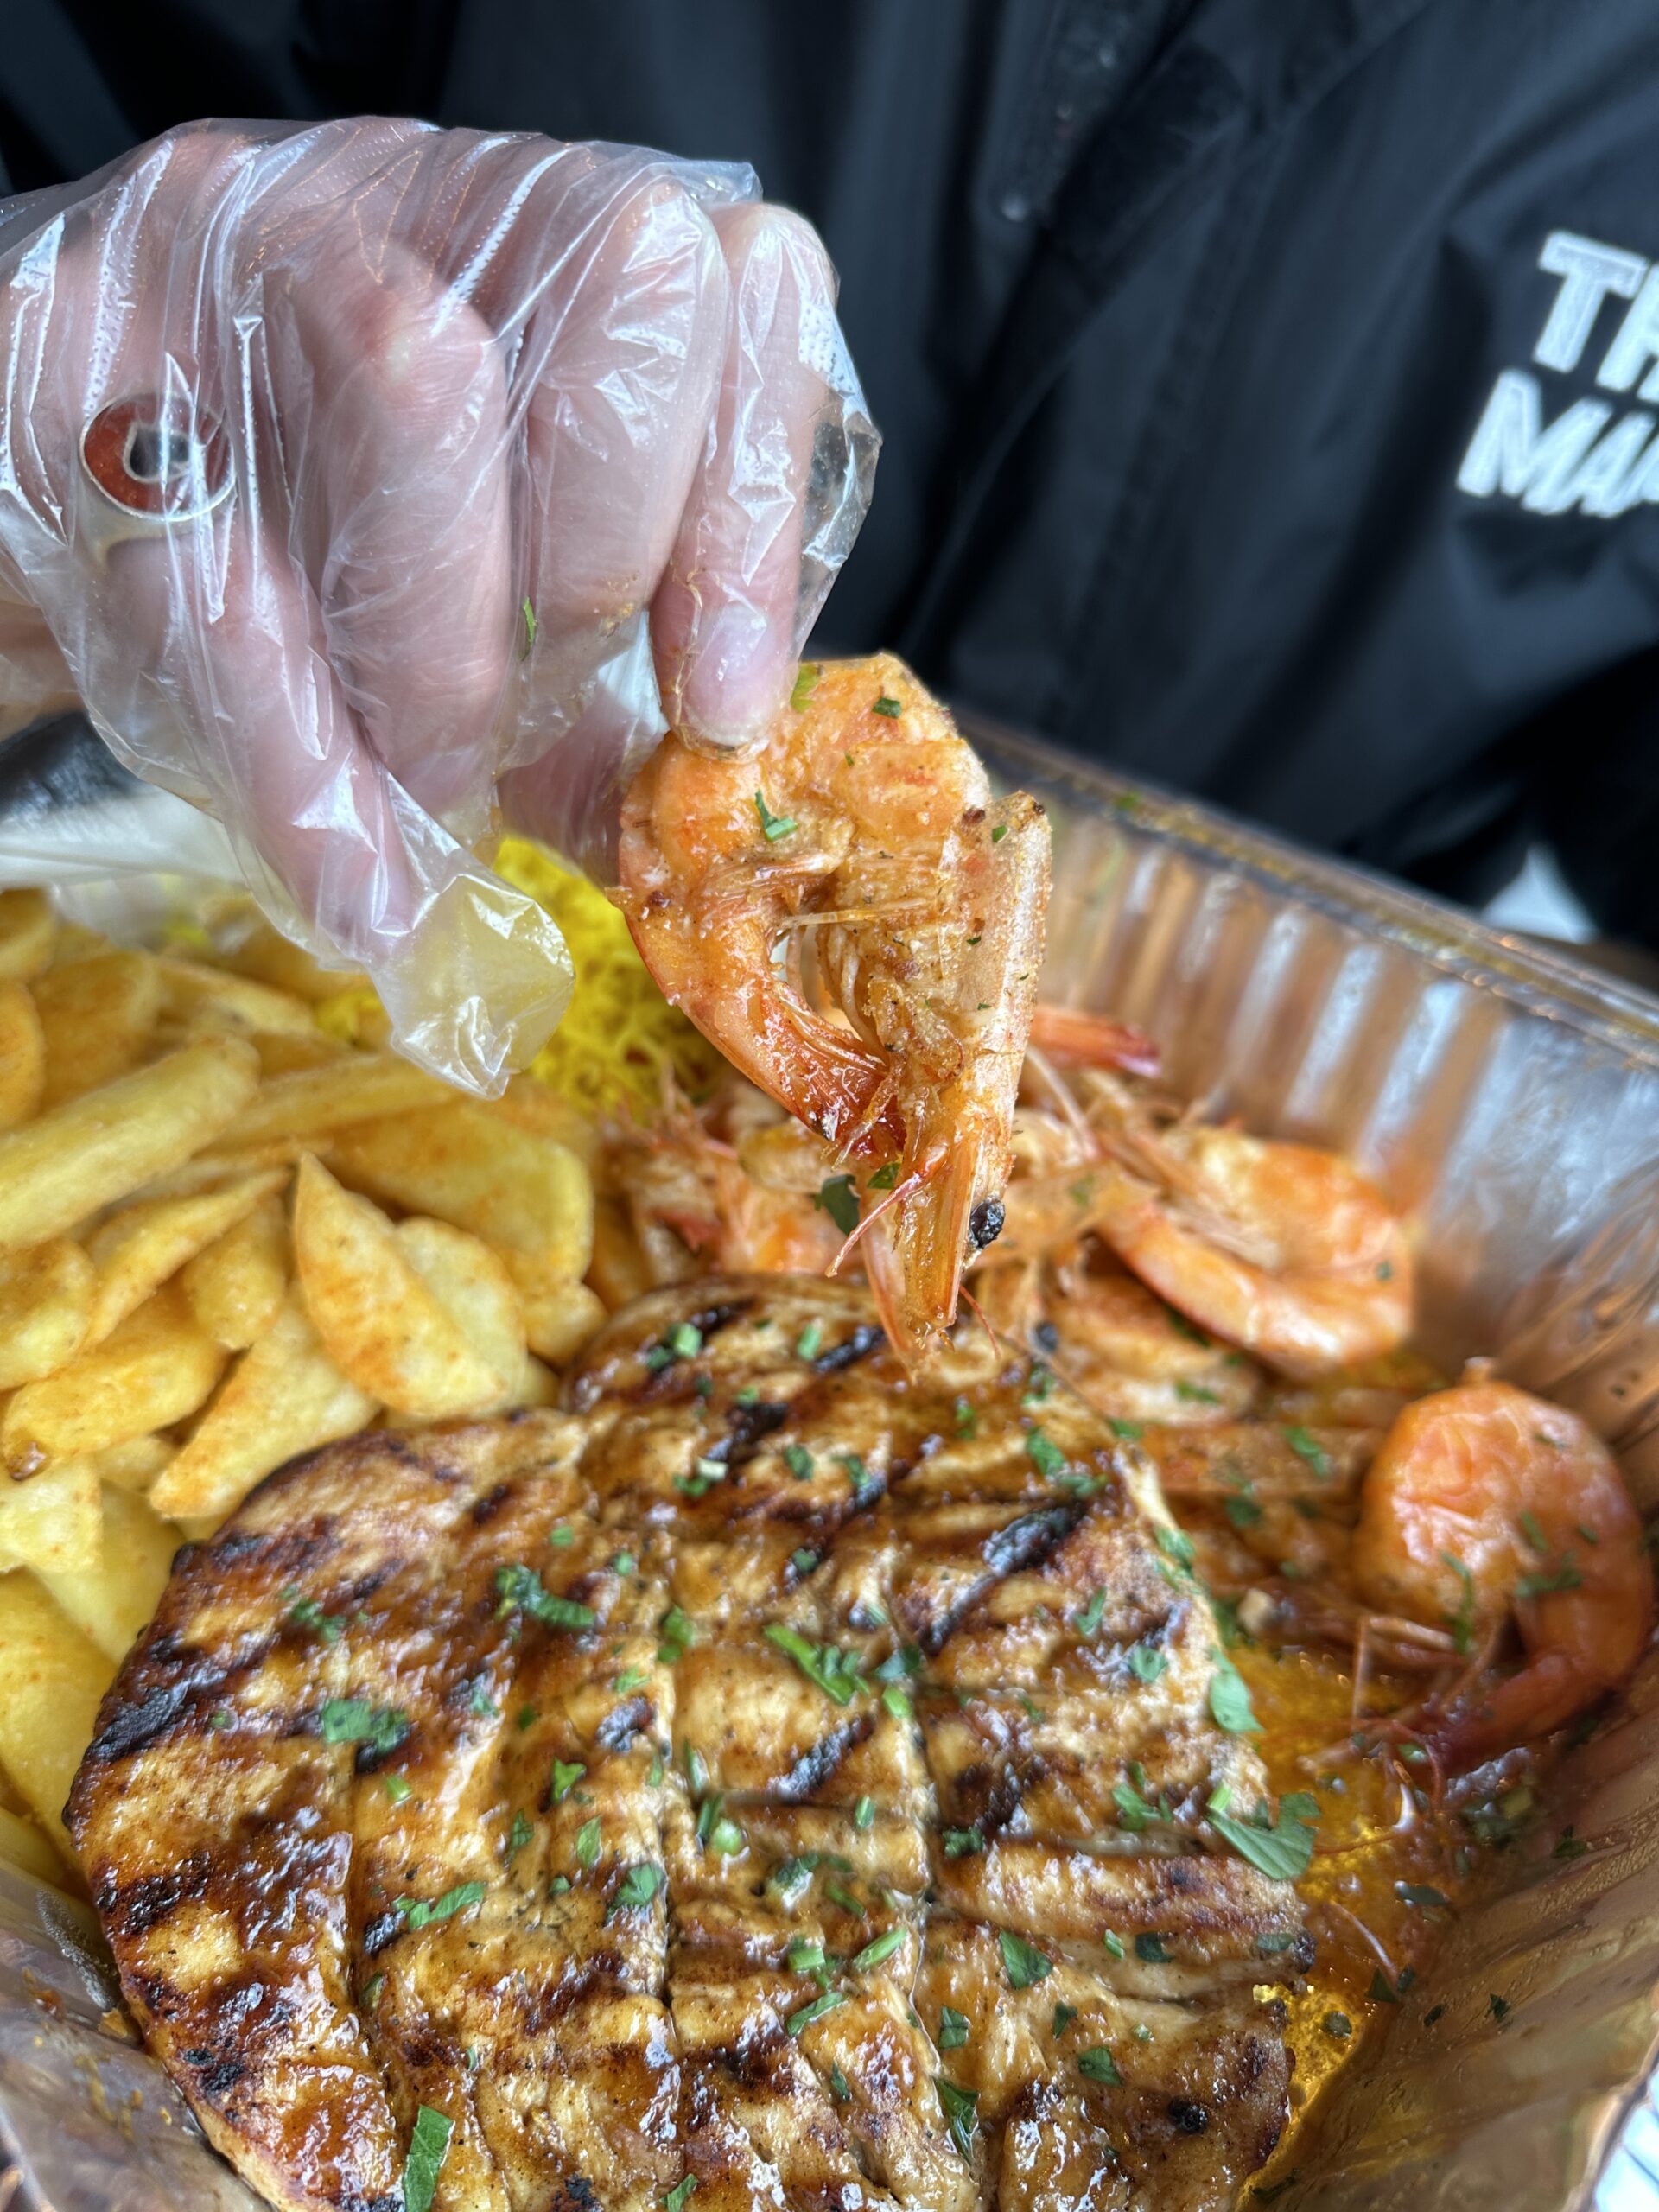 Jimmy's Killer Prawns was listed as one of Big Zuu's favourite restaurants in Manchester